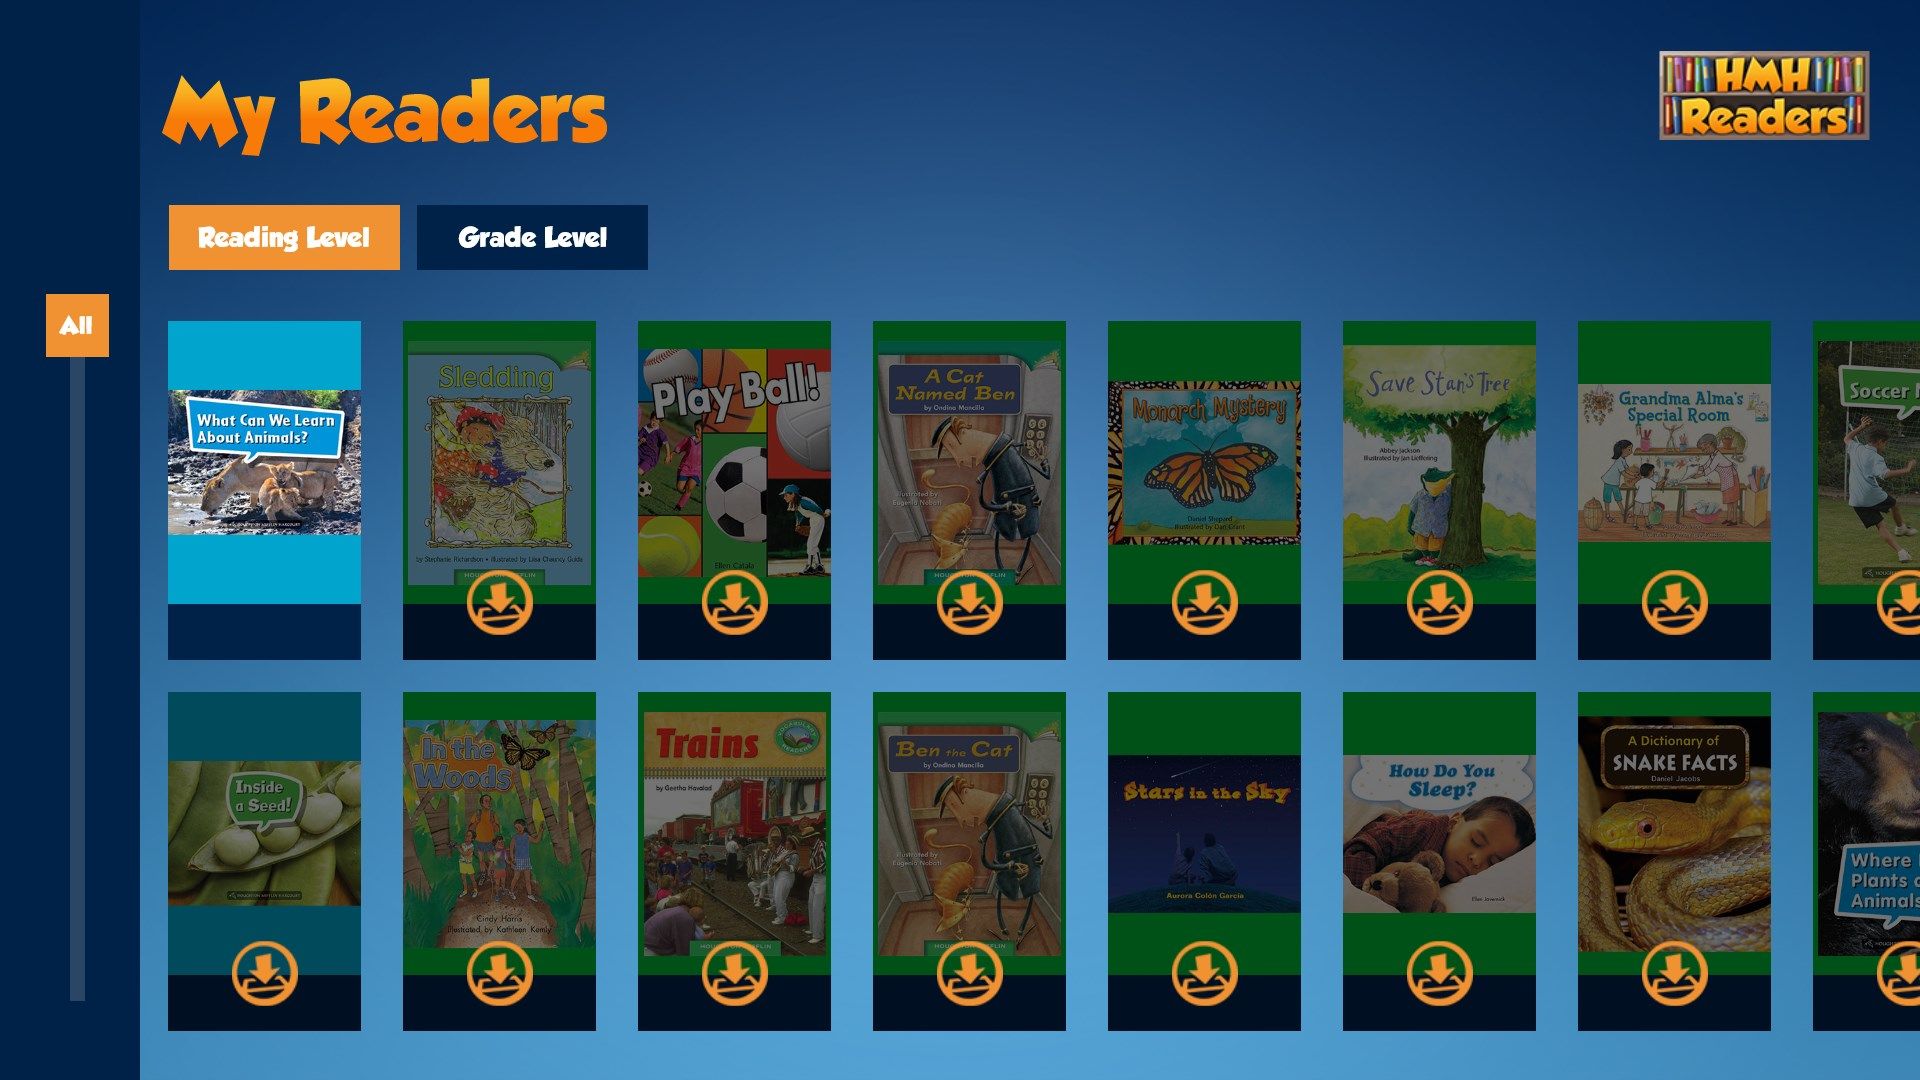 The My Readers Screen shows the free books that are available with HMH Readers and the books from an In-App Purchase. Tap on a book icon to open the book.